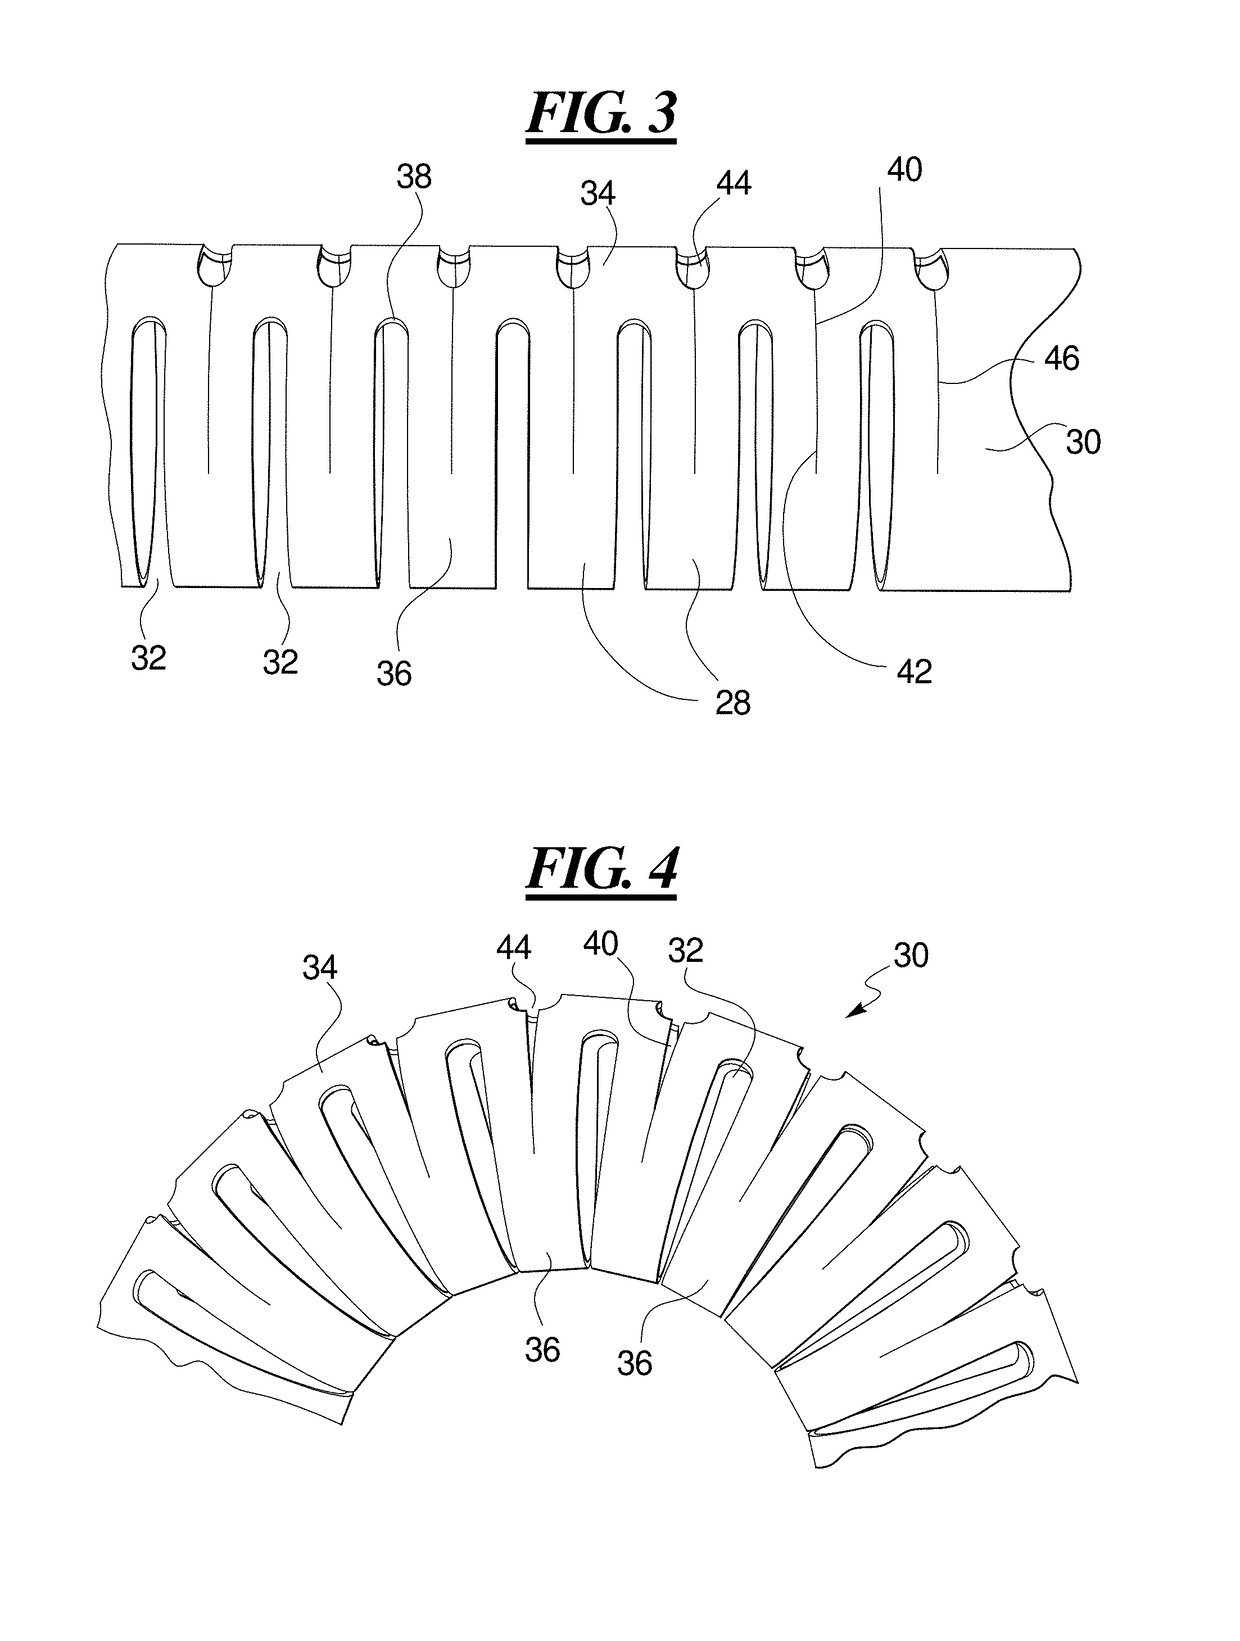 High load steerable shaft and method for cardiac catheter